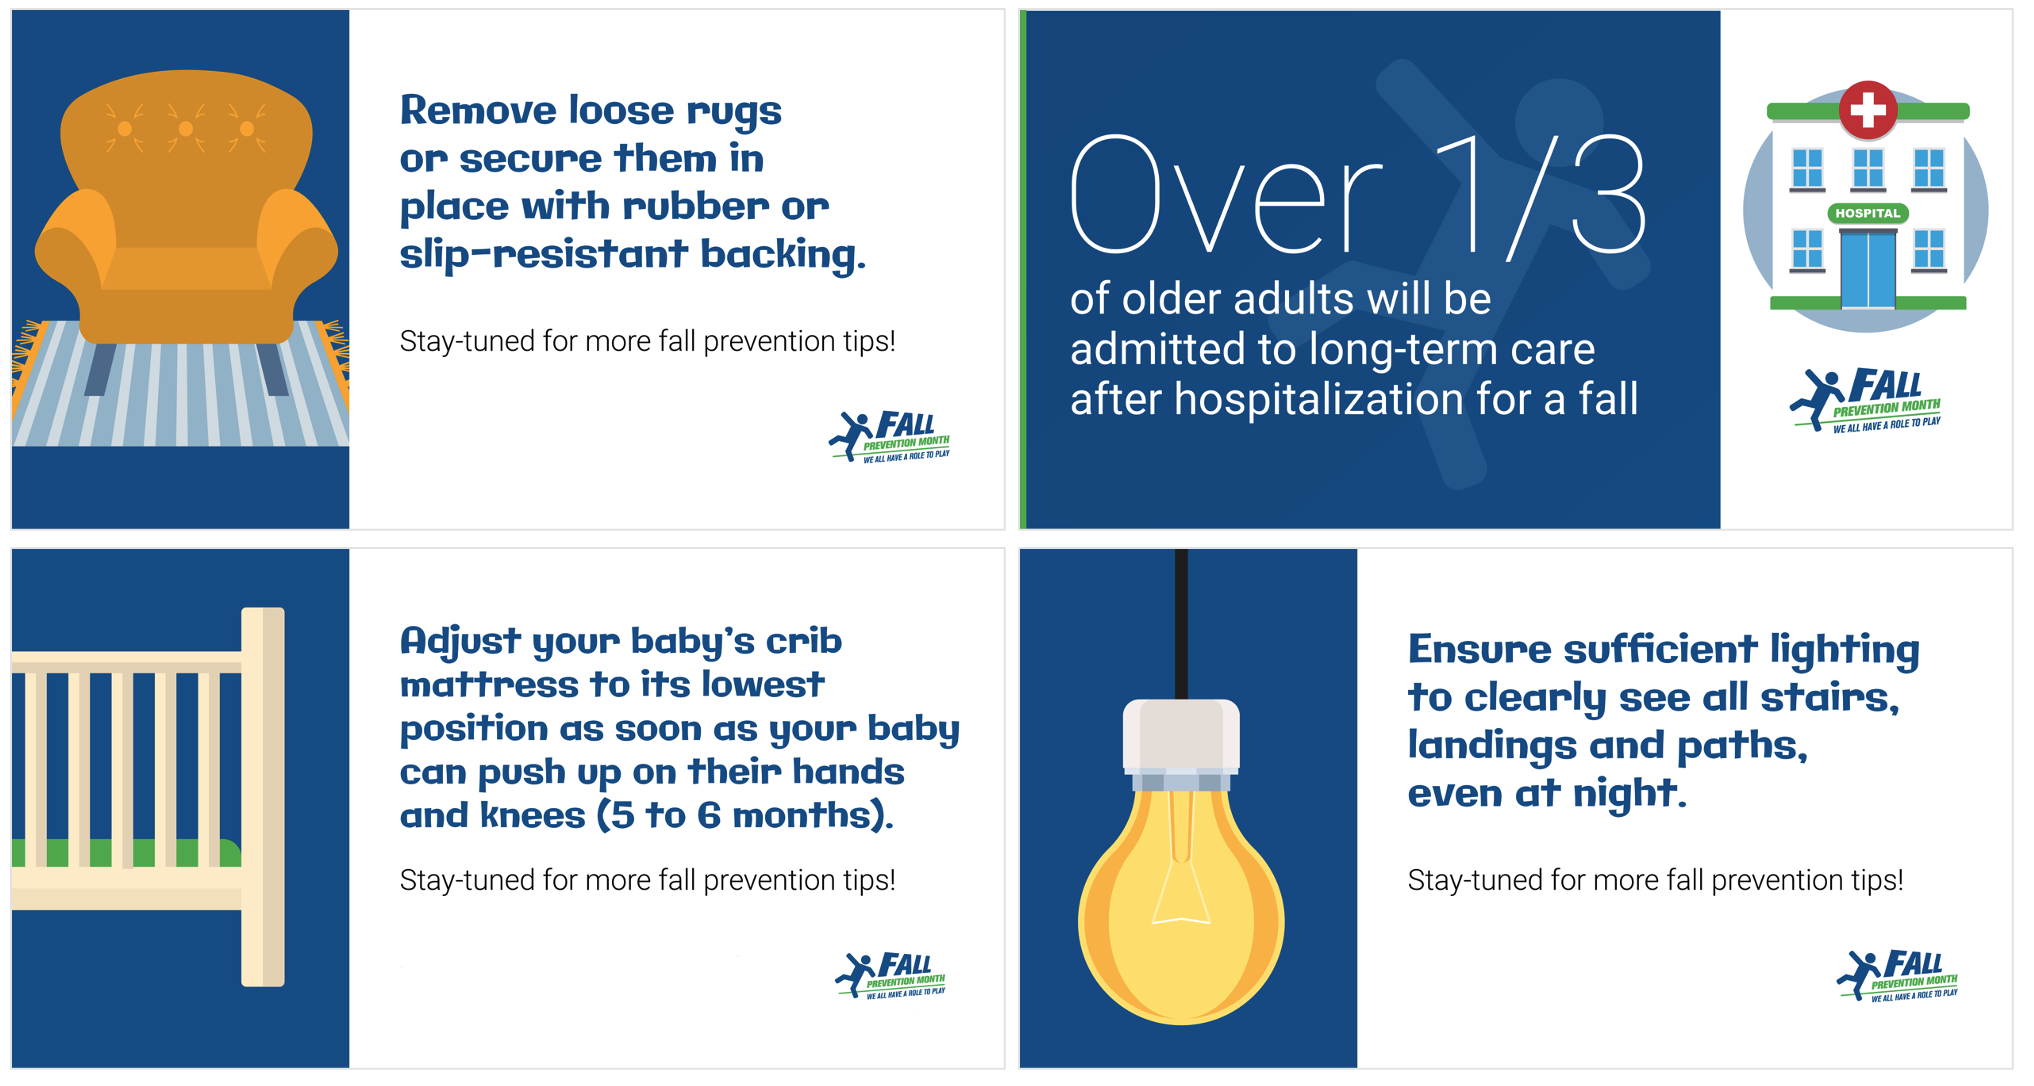 Fall Prevention Month - Canada